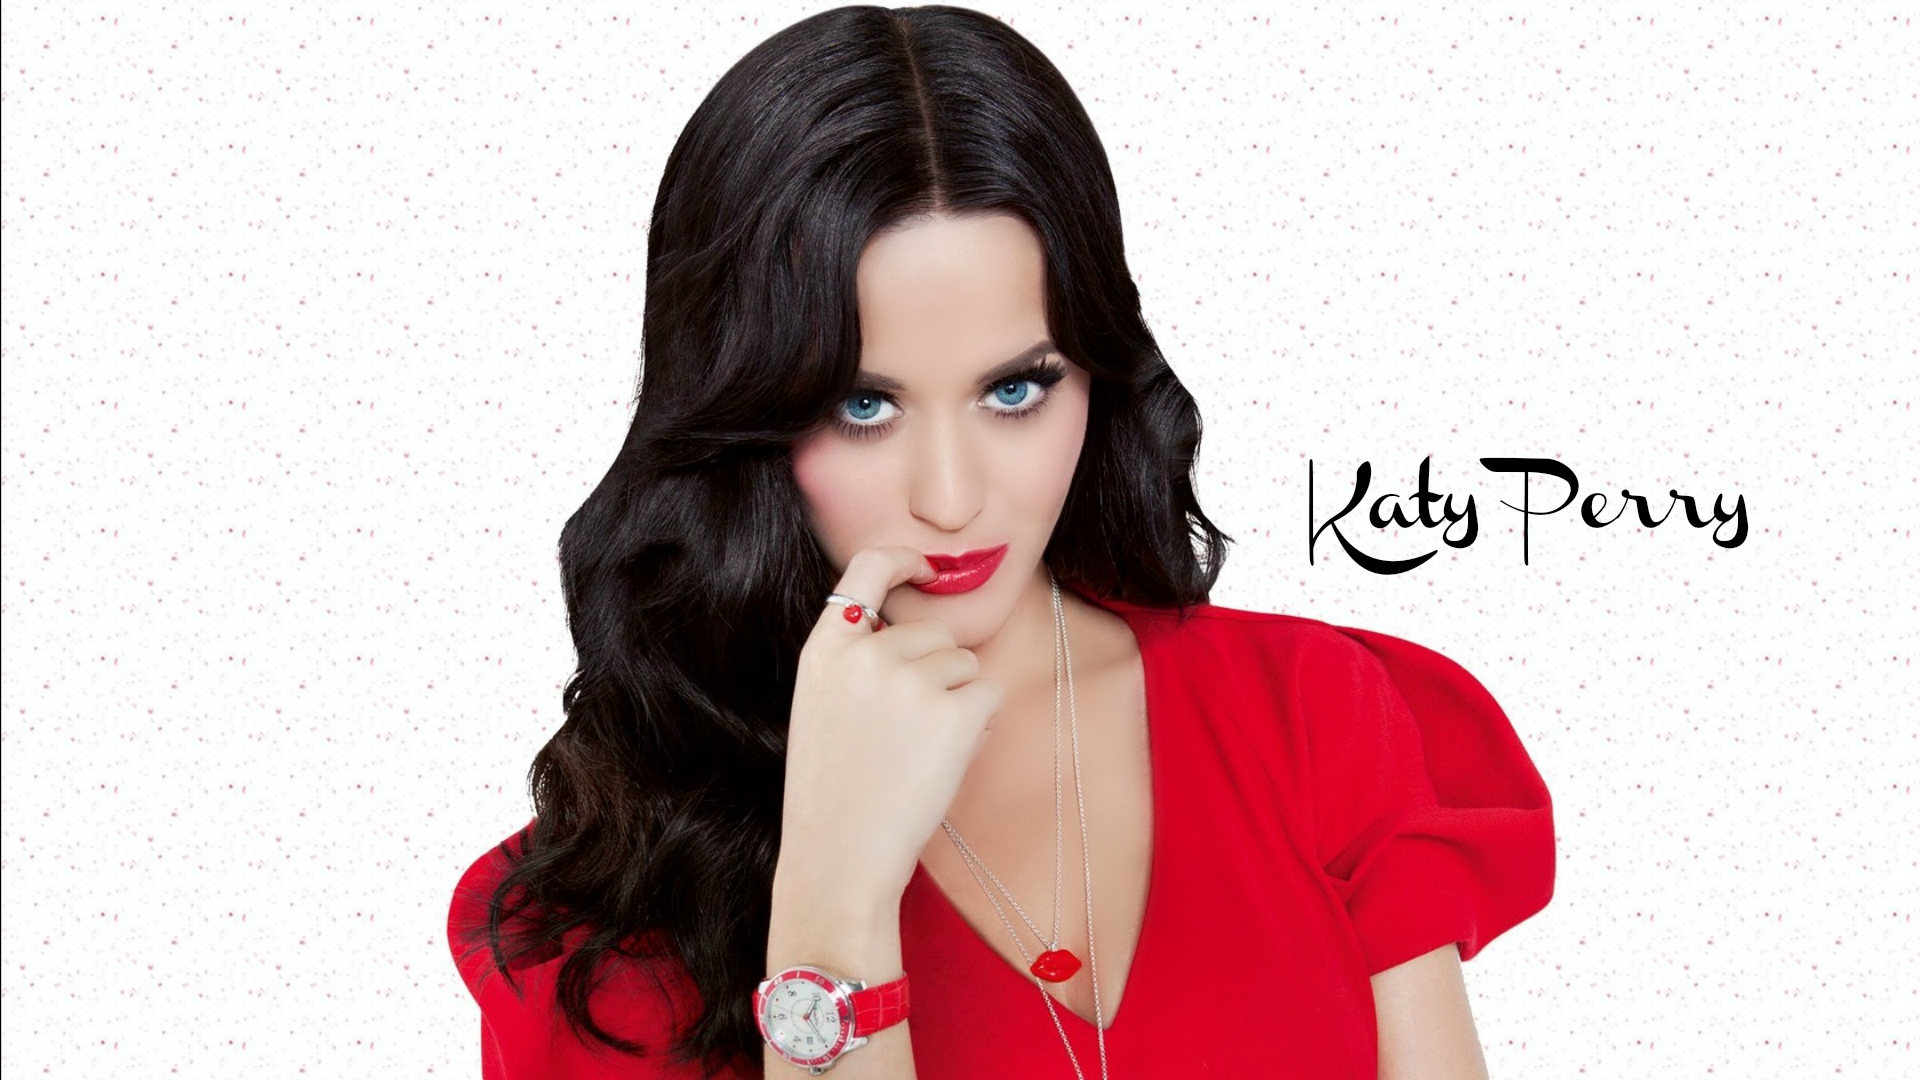 Wallpaper Free - Katy Perry , HD Wallpaper & Backgrounds